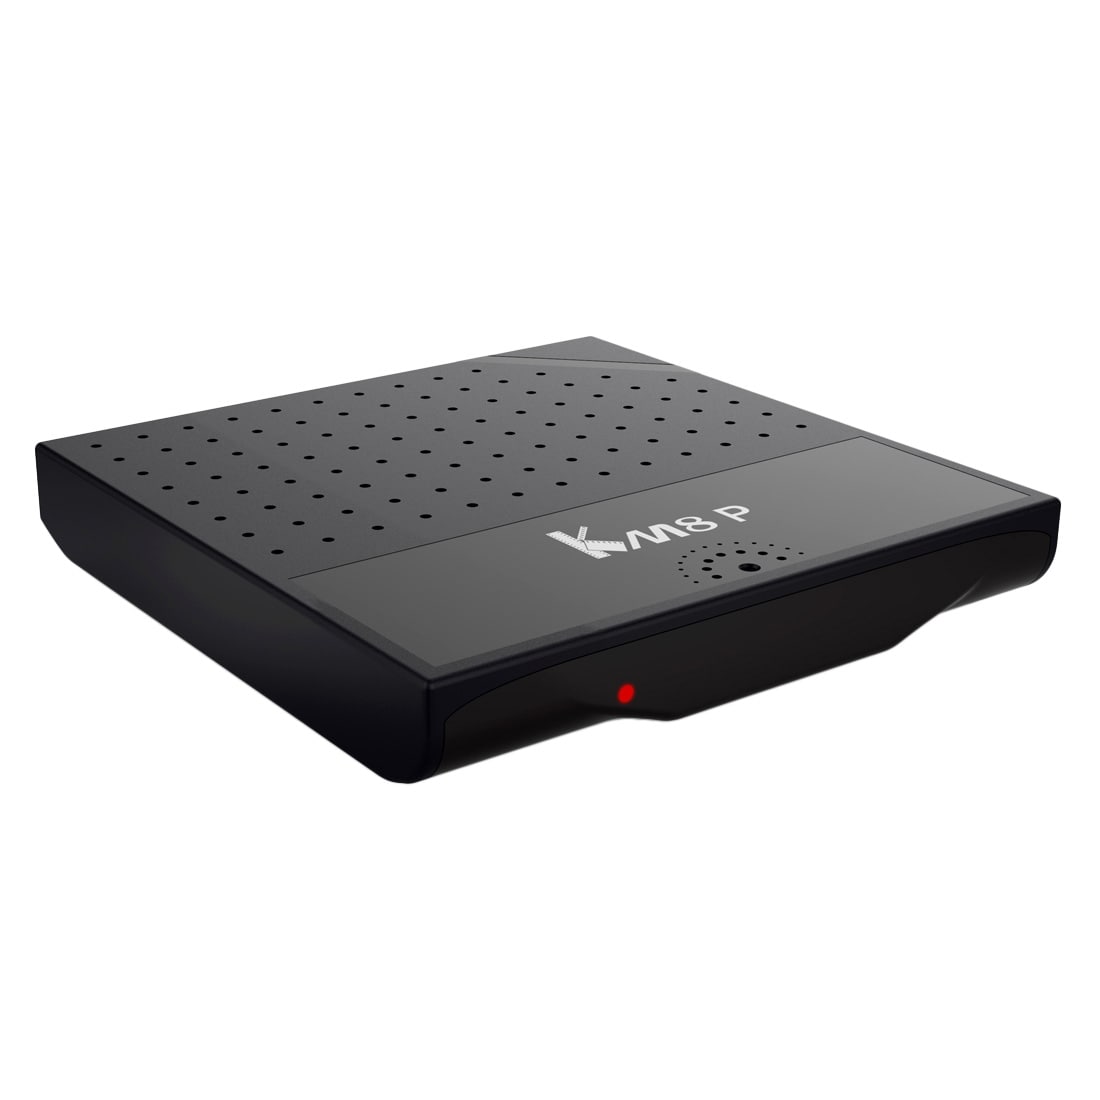 4K UHD Smart TV Box med fjernkontrol - Android 6.0 / ROM 8GB /  WiFi